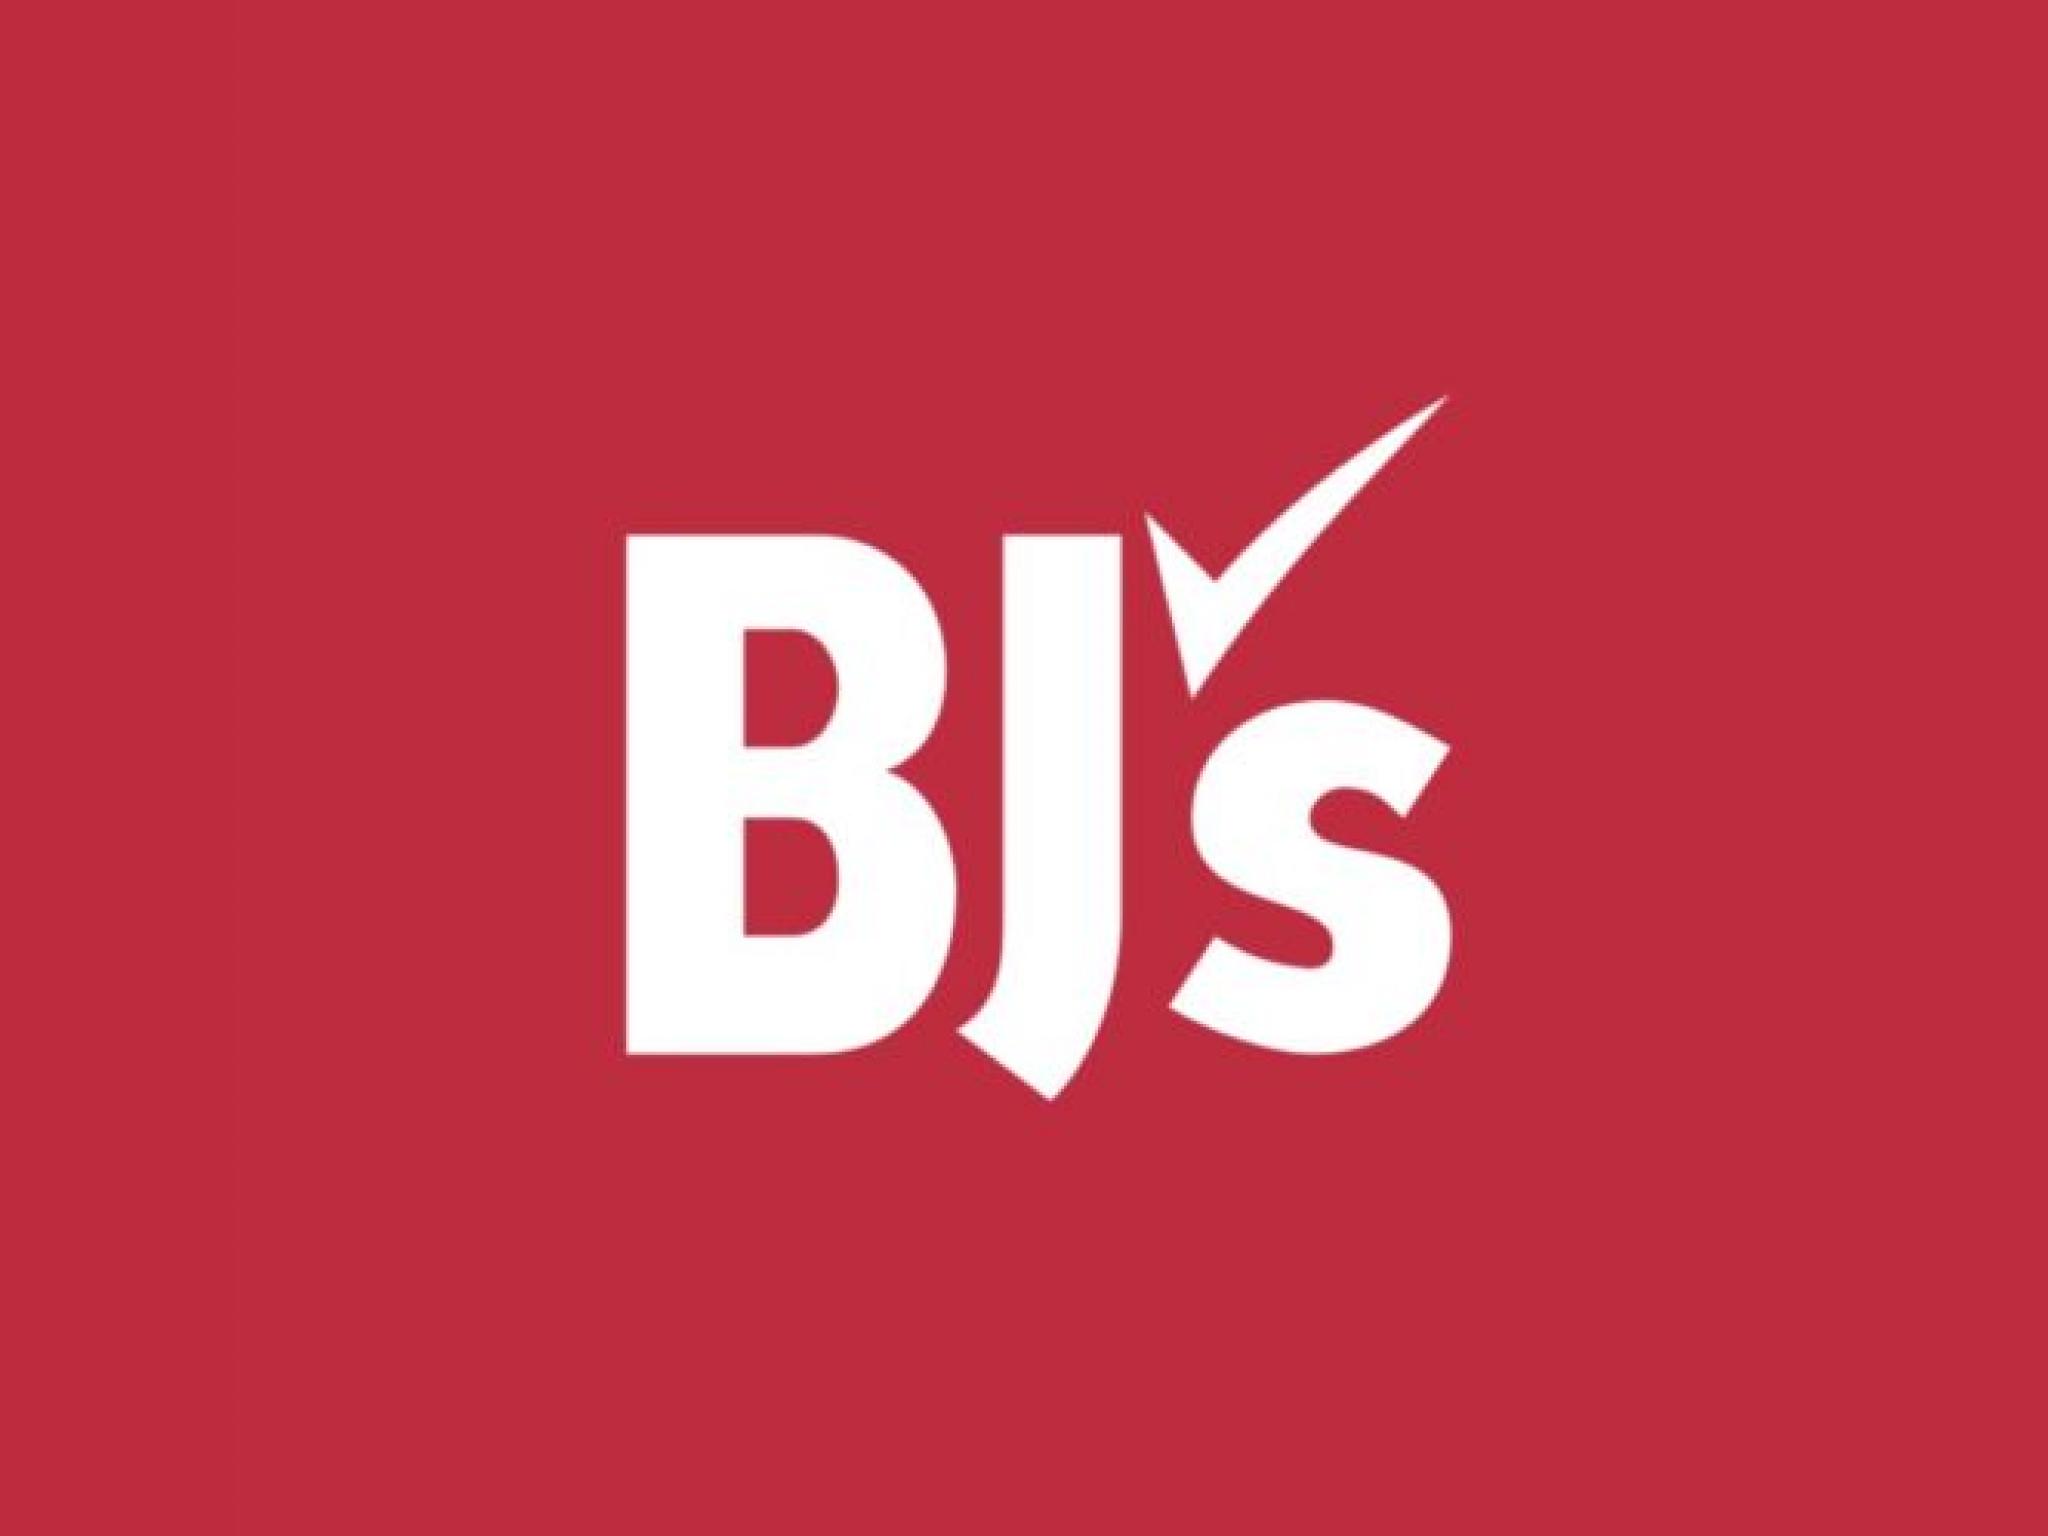  bjs-wholesale-club-analysts-raise-their-forecasts-after-upbeat-results 